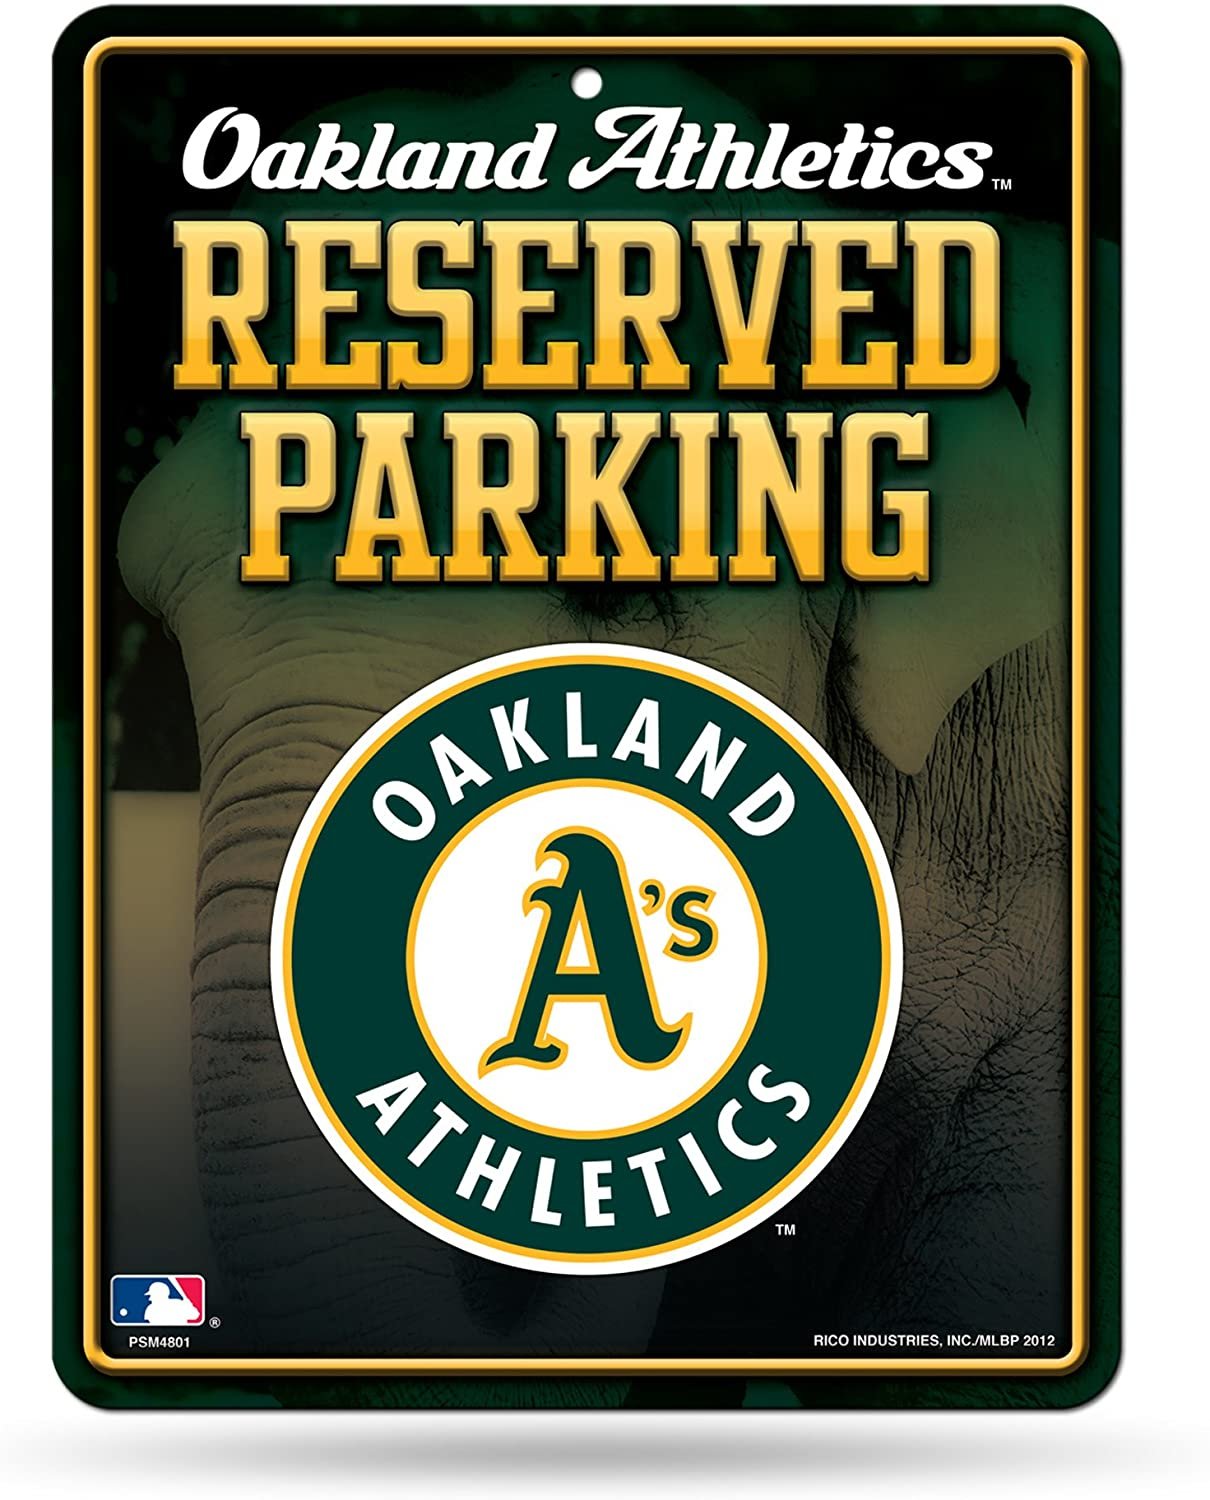 Oakland Athletics A's Metal Parking Sign 8x11 Inches